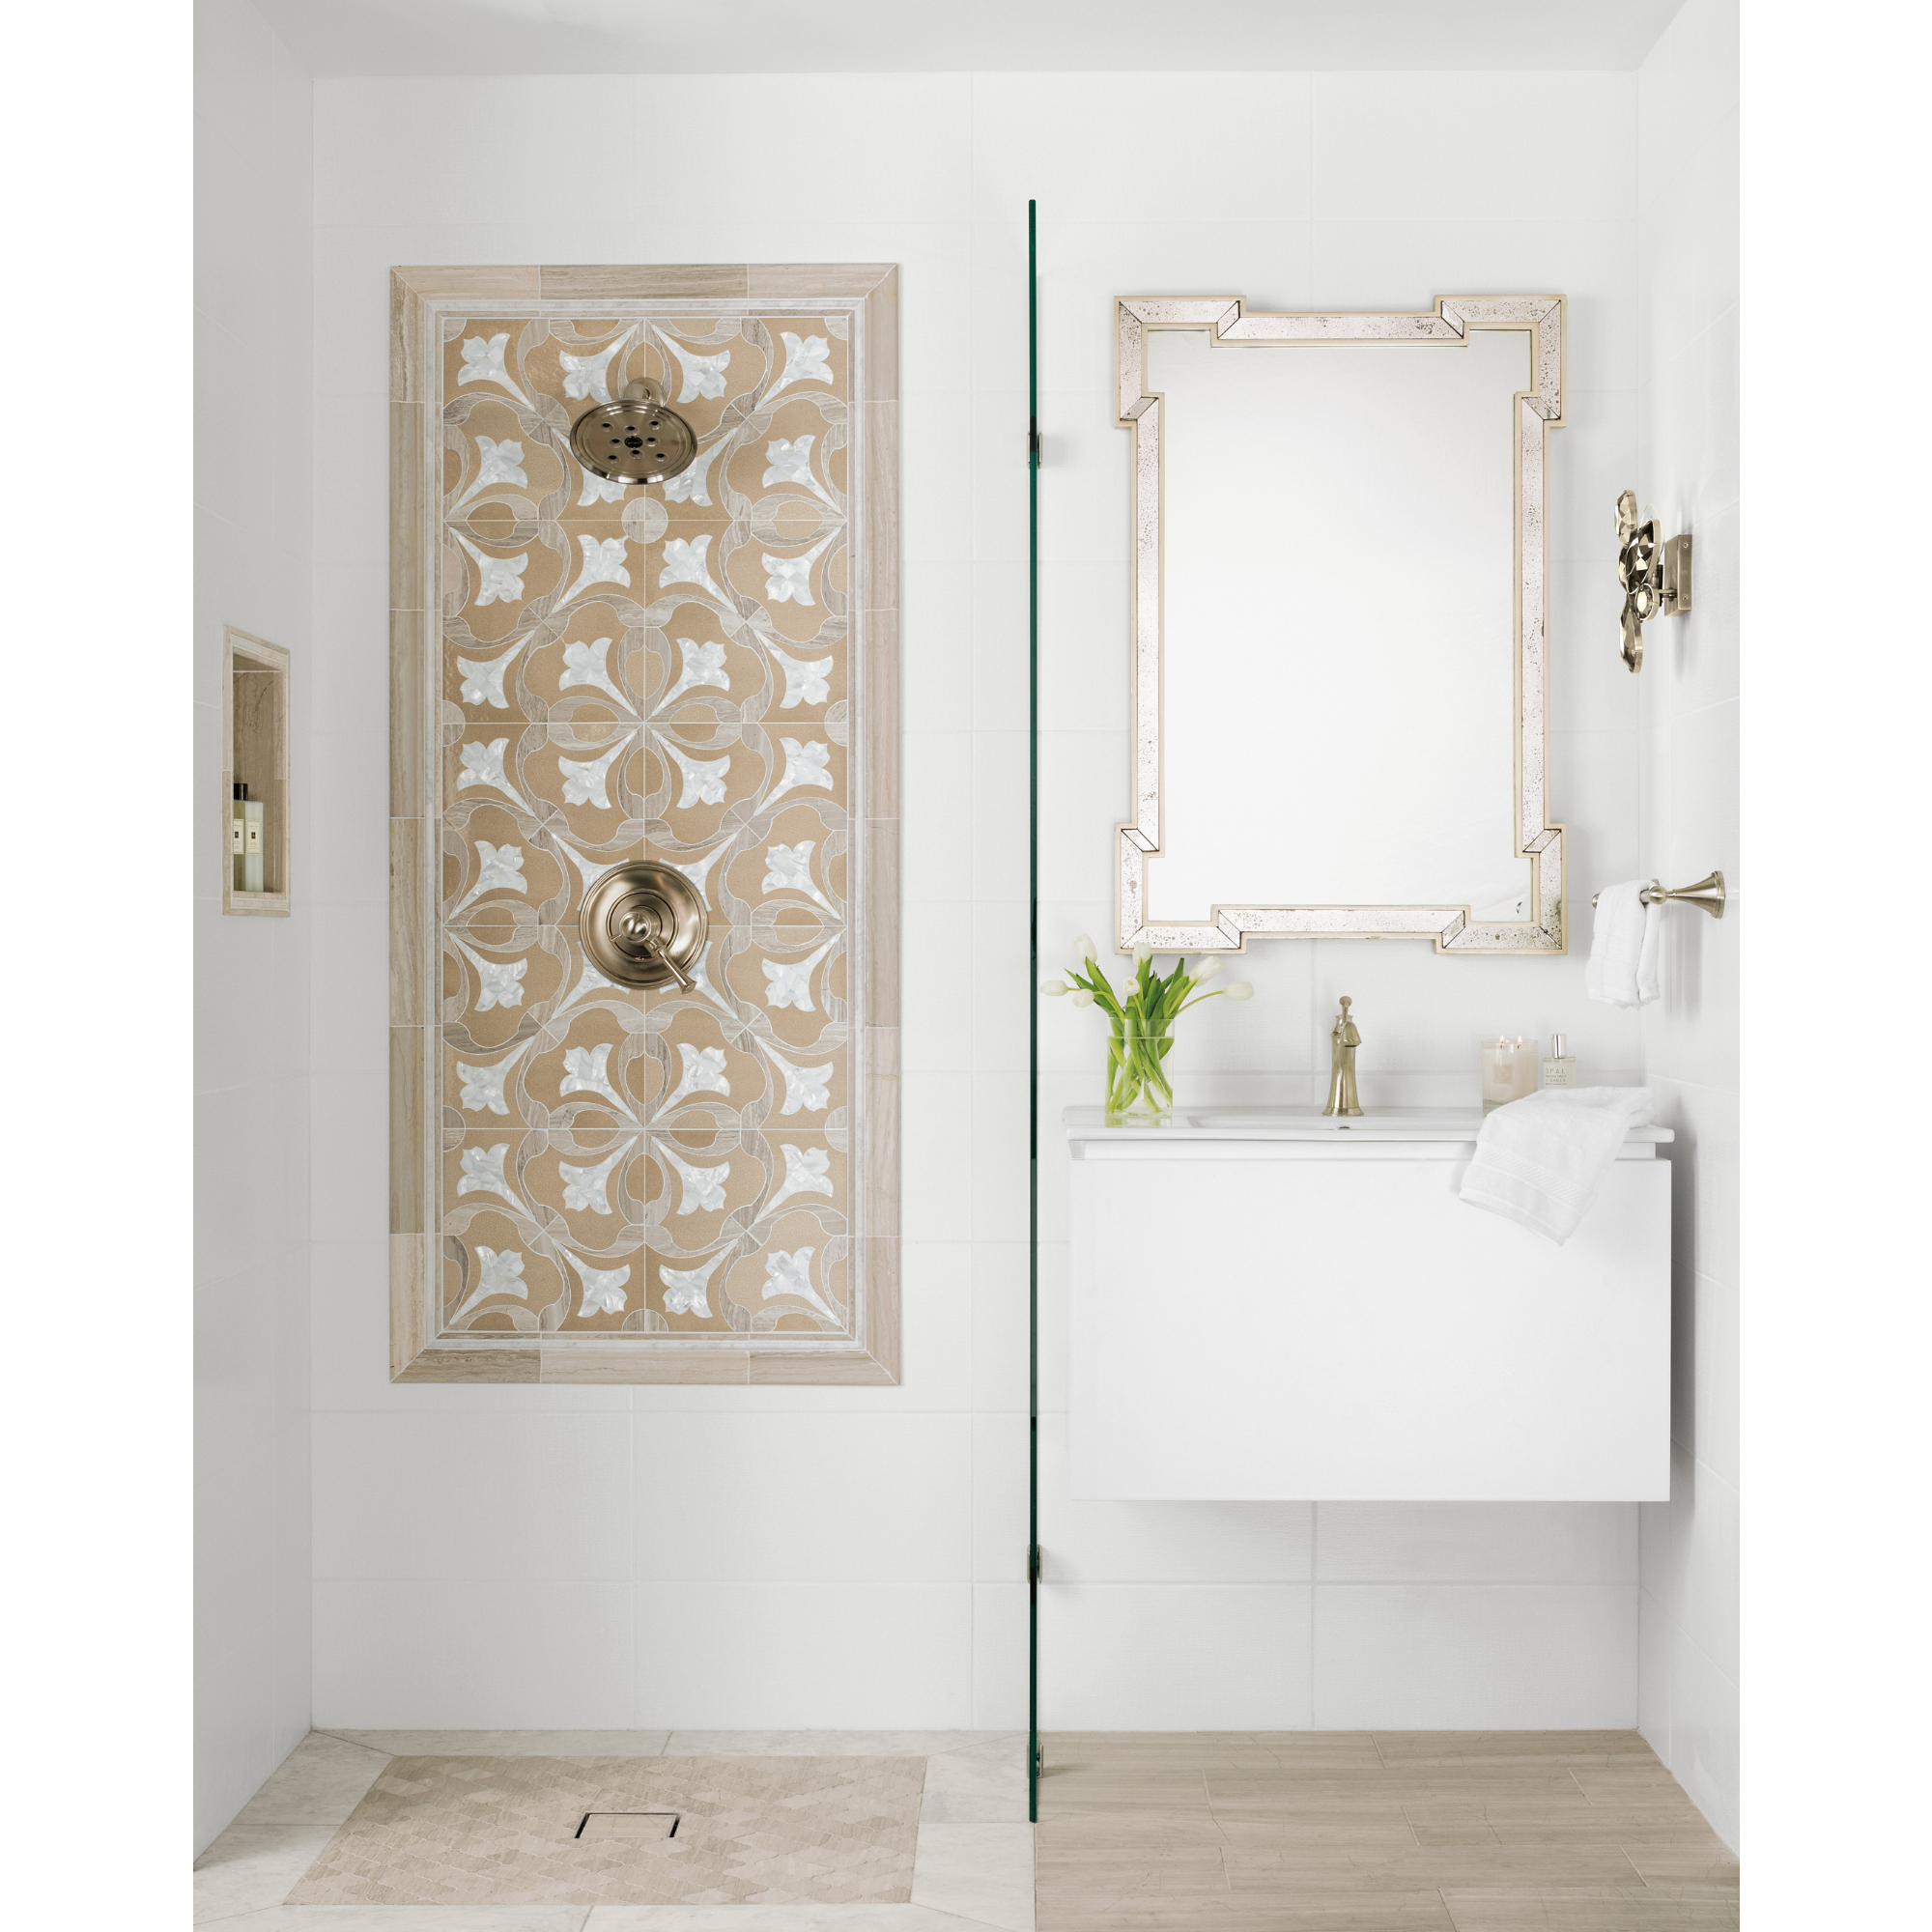 Bathroom area with walk in shower and floating vanity.  Shower and wainscoting tile are rectangular raised glaze white surfaces . Shower wall has a framed out tulip mosaic tile and matching niche. Flooring is marble and limestone tiles in similar tones.